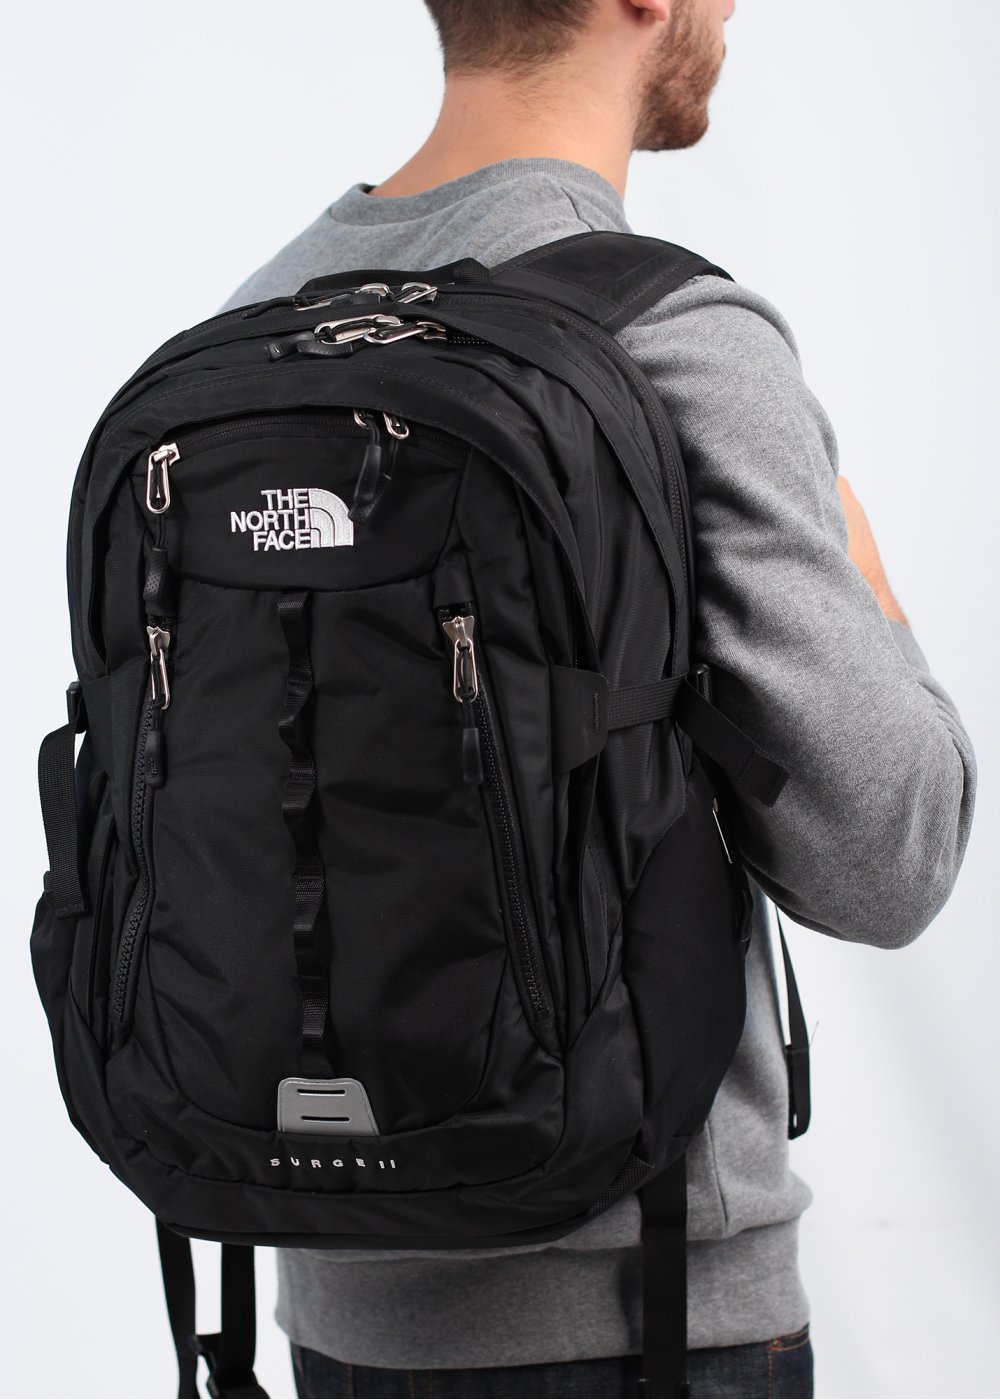 Ba lô The North Face Surge II Backpack The North Face